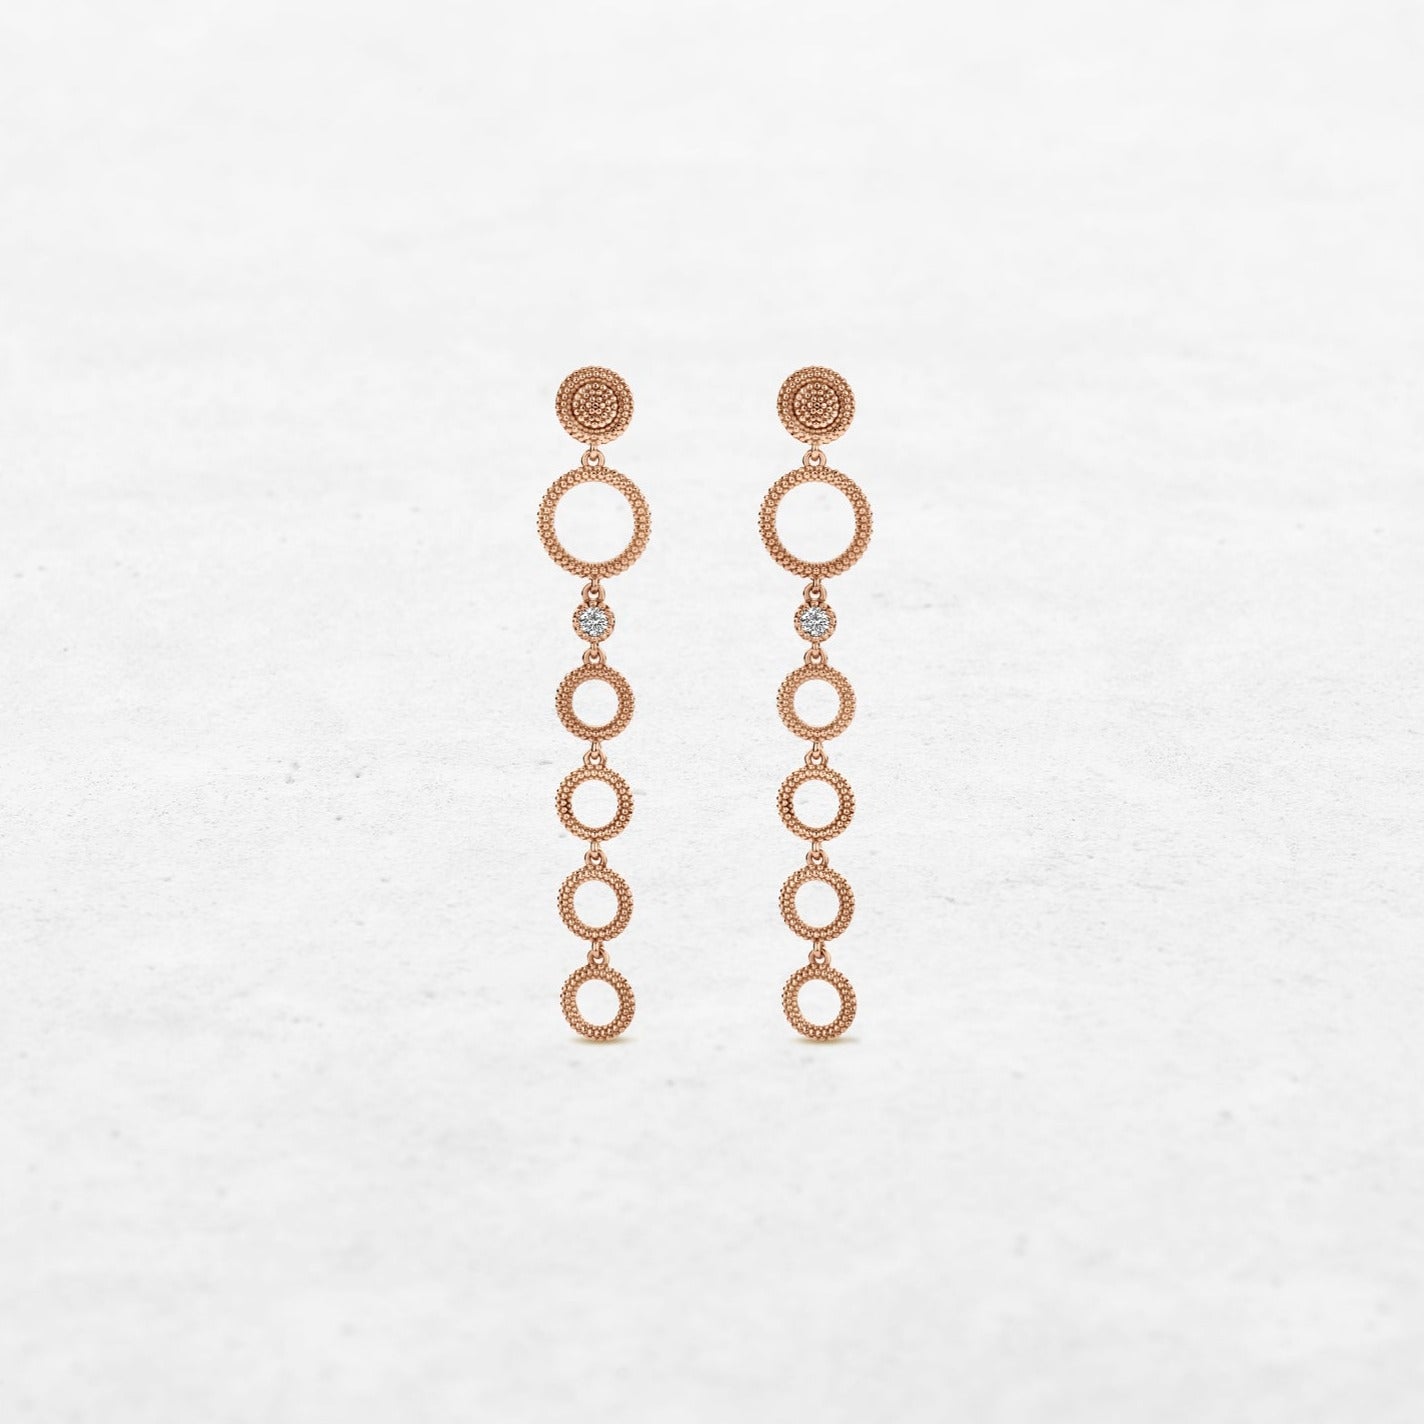 Circular earrings with different sizes with one diamond in rose gold made by O! Jewelry